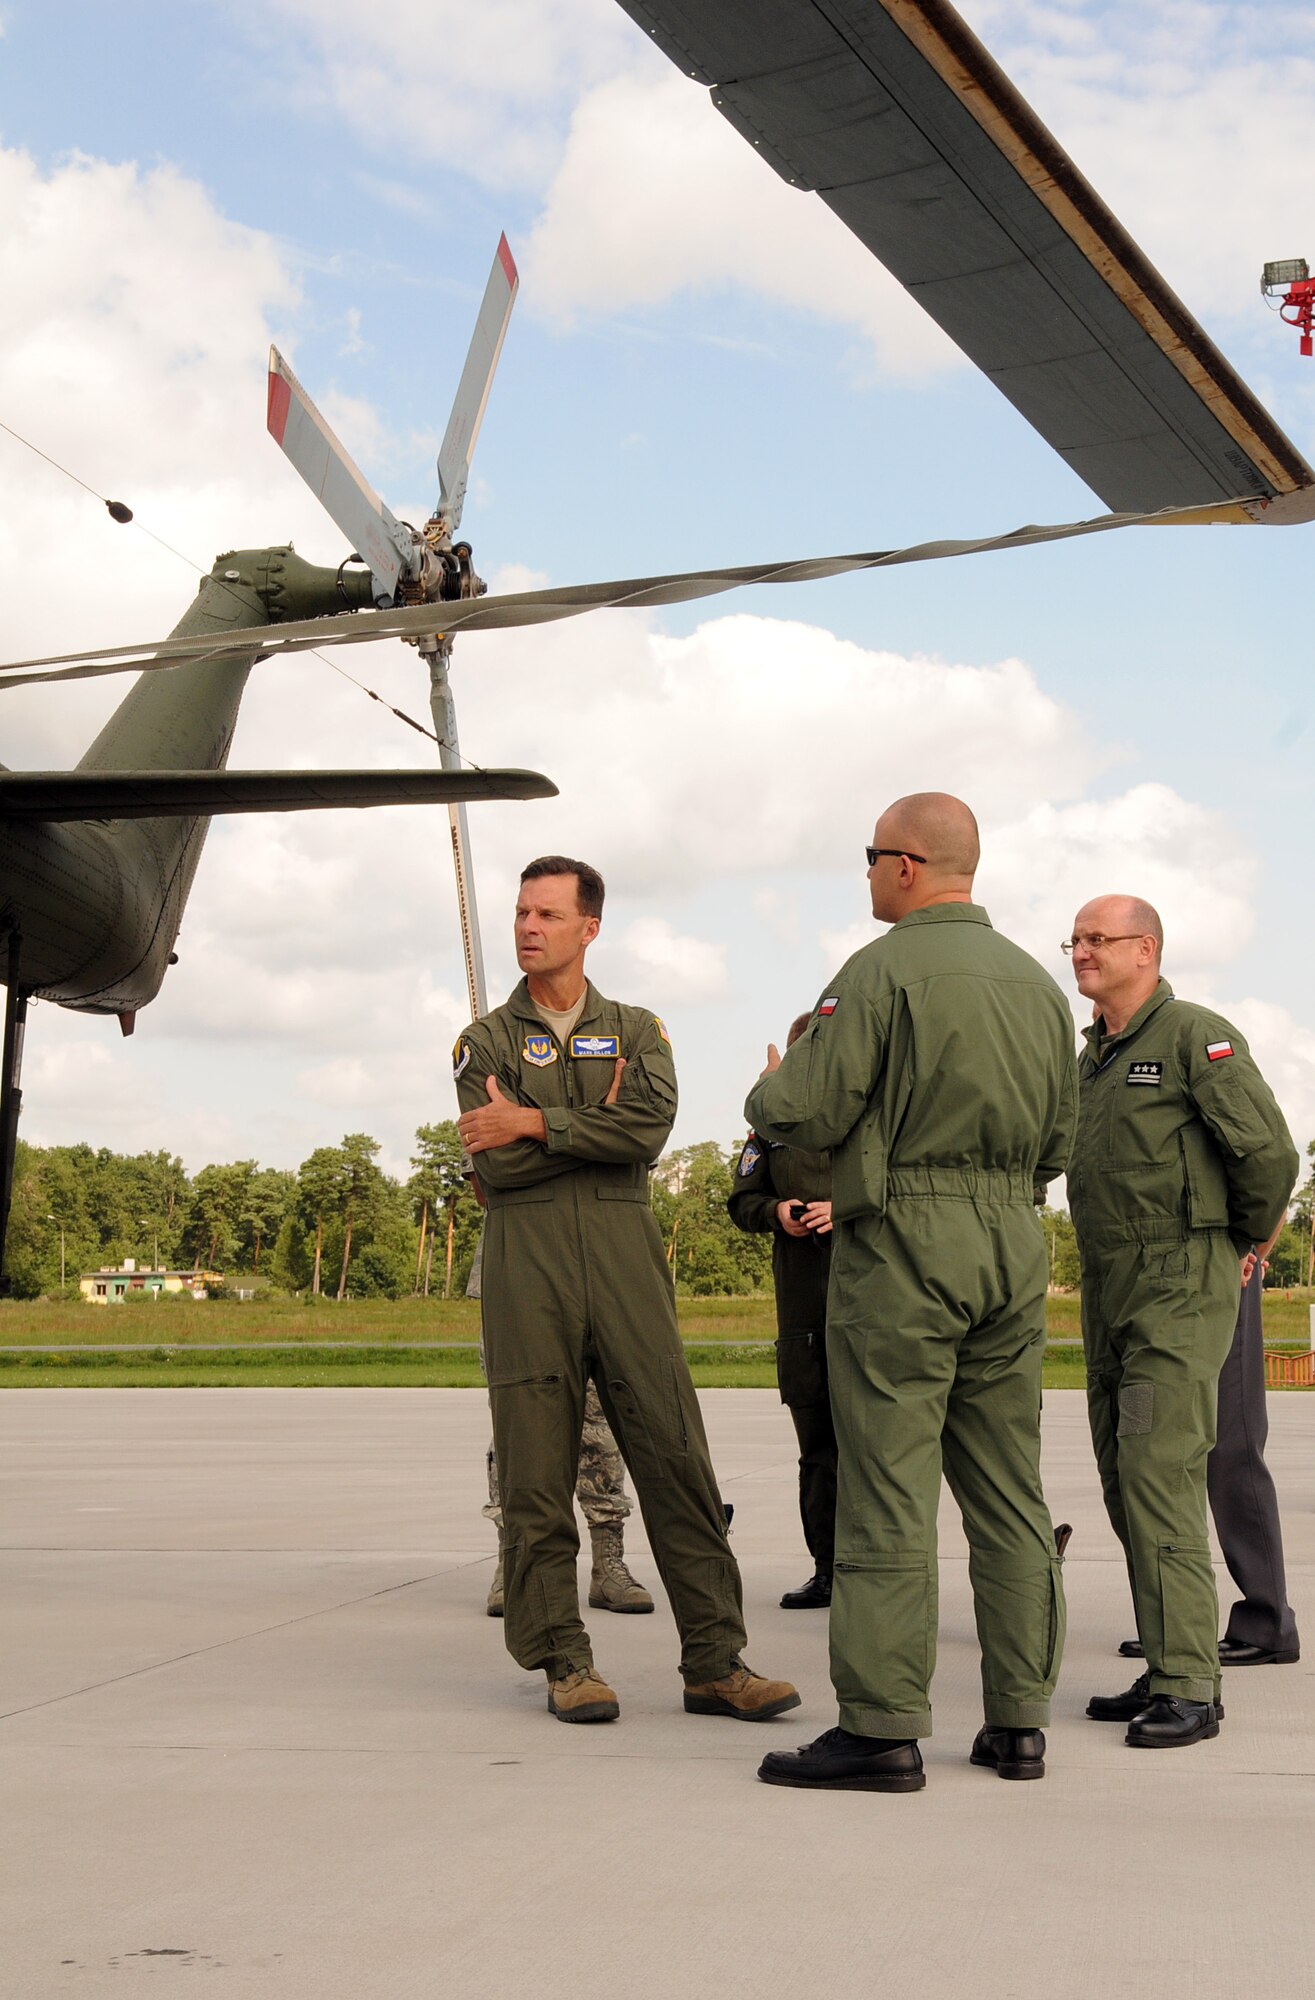 Brig. Gen. Mark Dillon, 86th Airlift Wing commander, along with Polish air force Col. pil. Slawomir Zakowski, 3rd Airlift Wing commander, receives a tour of one of the many aircraft utilized by the 3rd Airlift, July 26, 2011, Powidz Air Base, Poland. During his visit to the “sister wing”, Gen. Dillon also toured the new control tower and a new hanger built for C-130 aircraft maintenance. (U.S.  Air Force photo by Staff Sgt. Tyrona Lawson). 